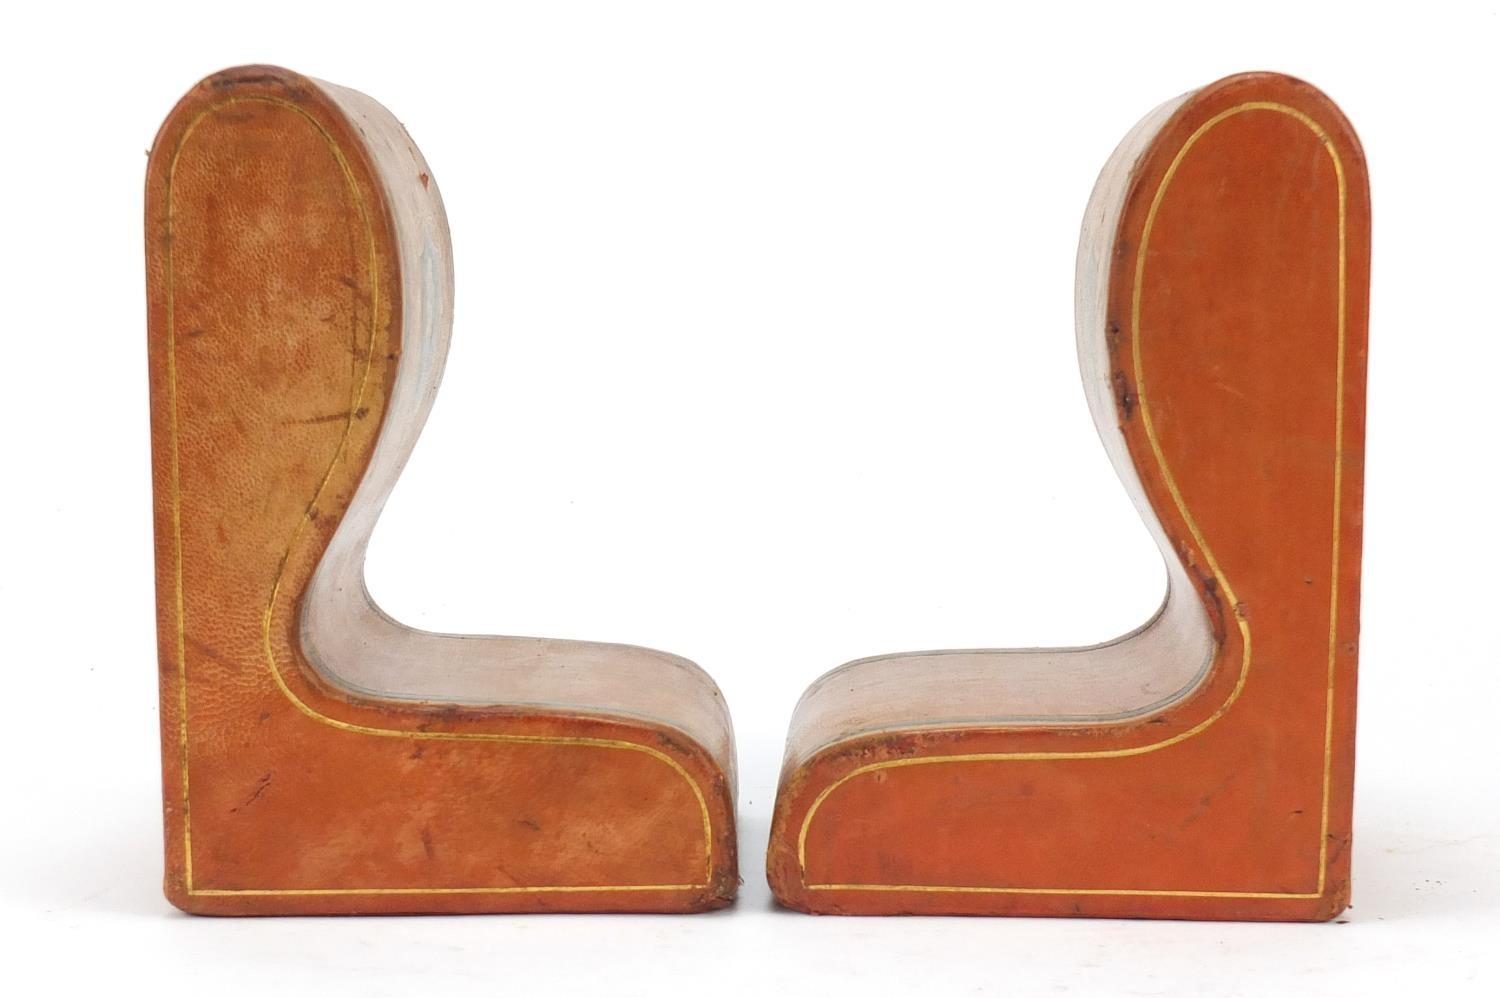 Pair of Italian tooled leather book ends with embossed crests, retailed by Harrods, each 17cm high : - Image 7 of 9